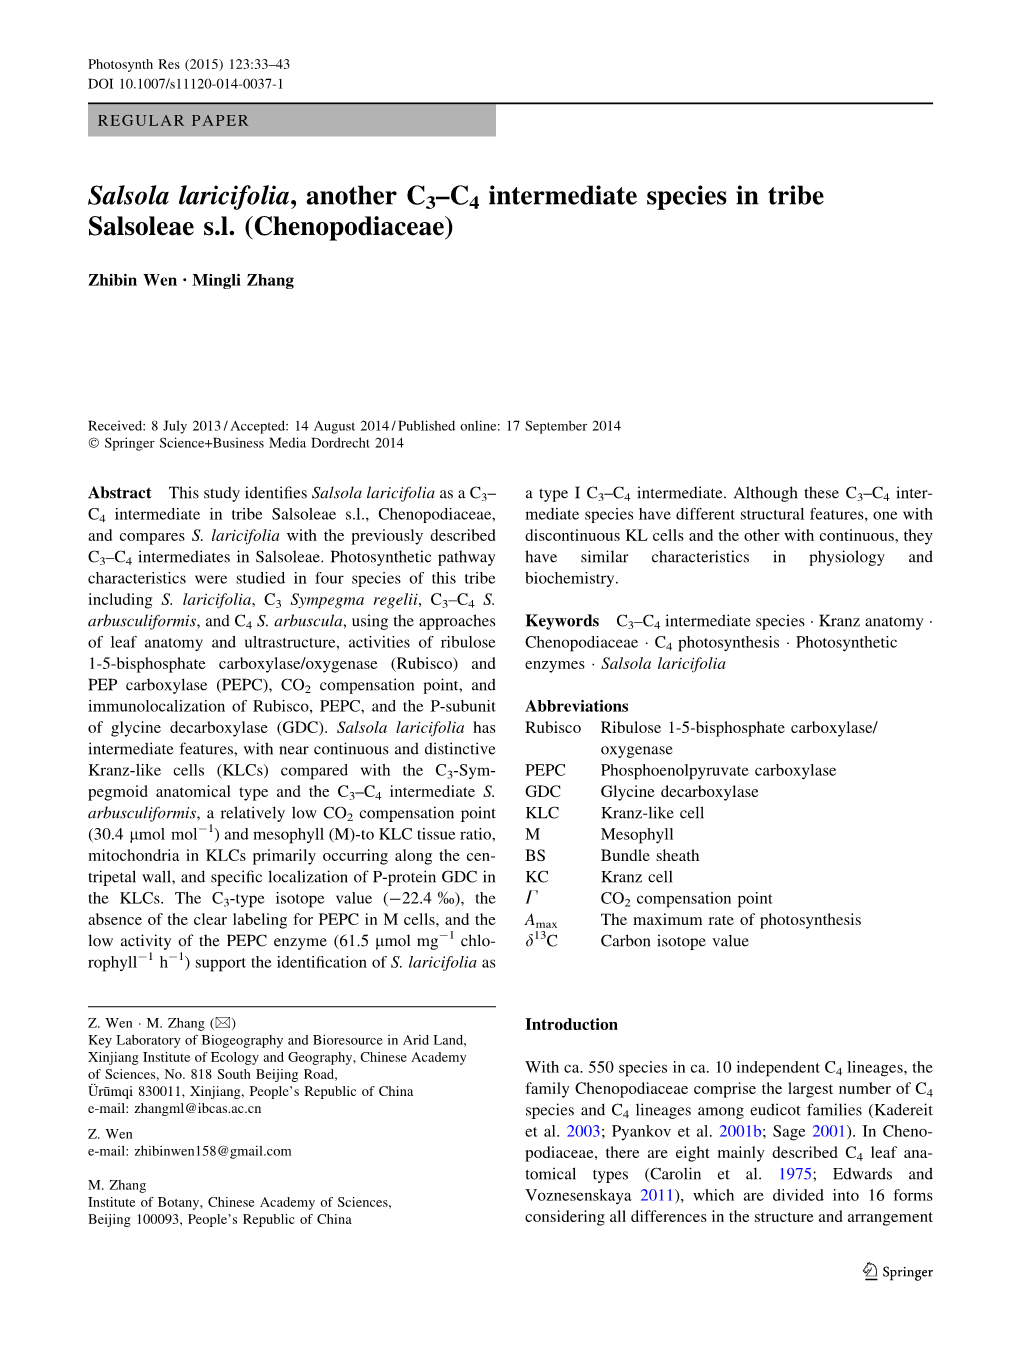 Salsola Laricifolia, Another C3–C4 Intermediate Species in Tribe Salsoleae S.L